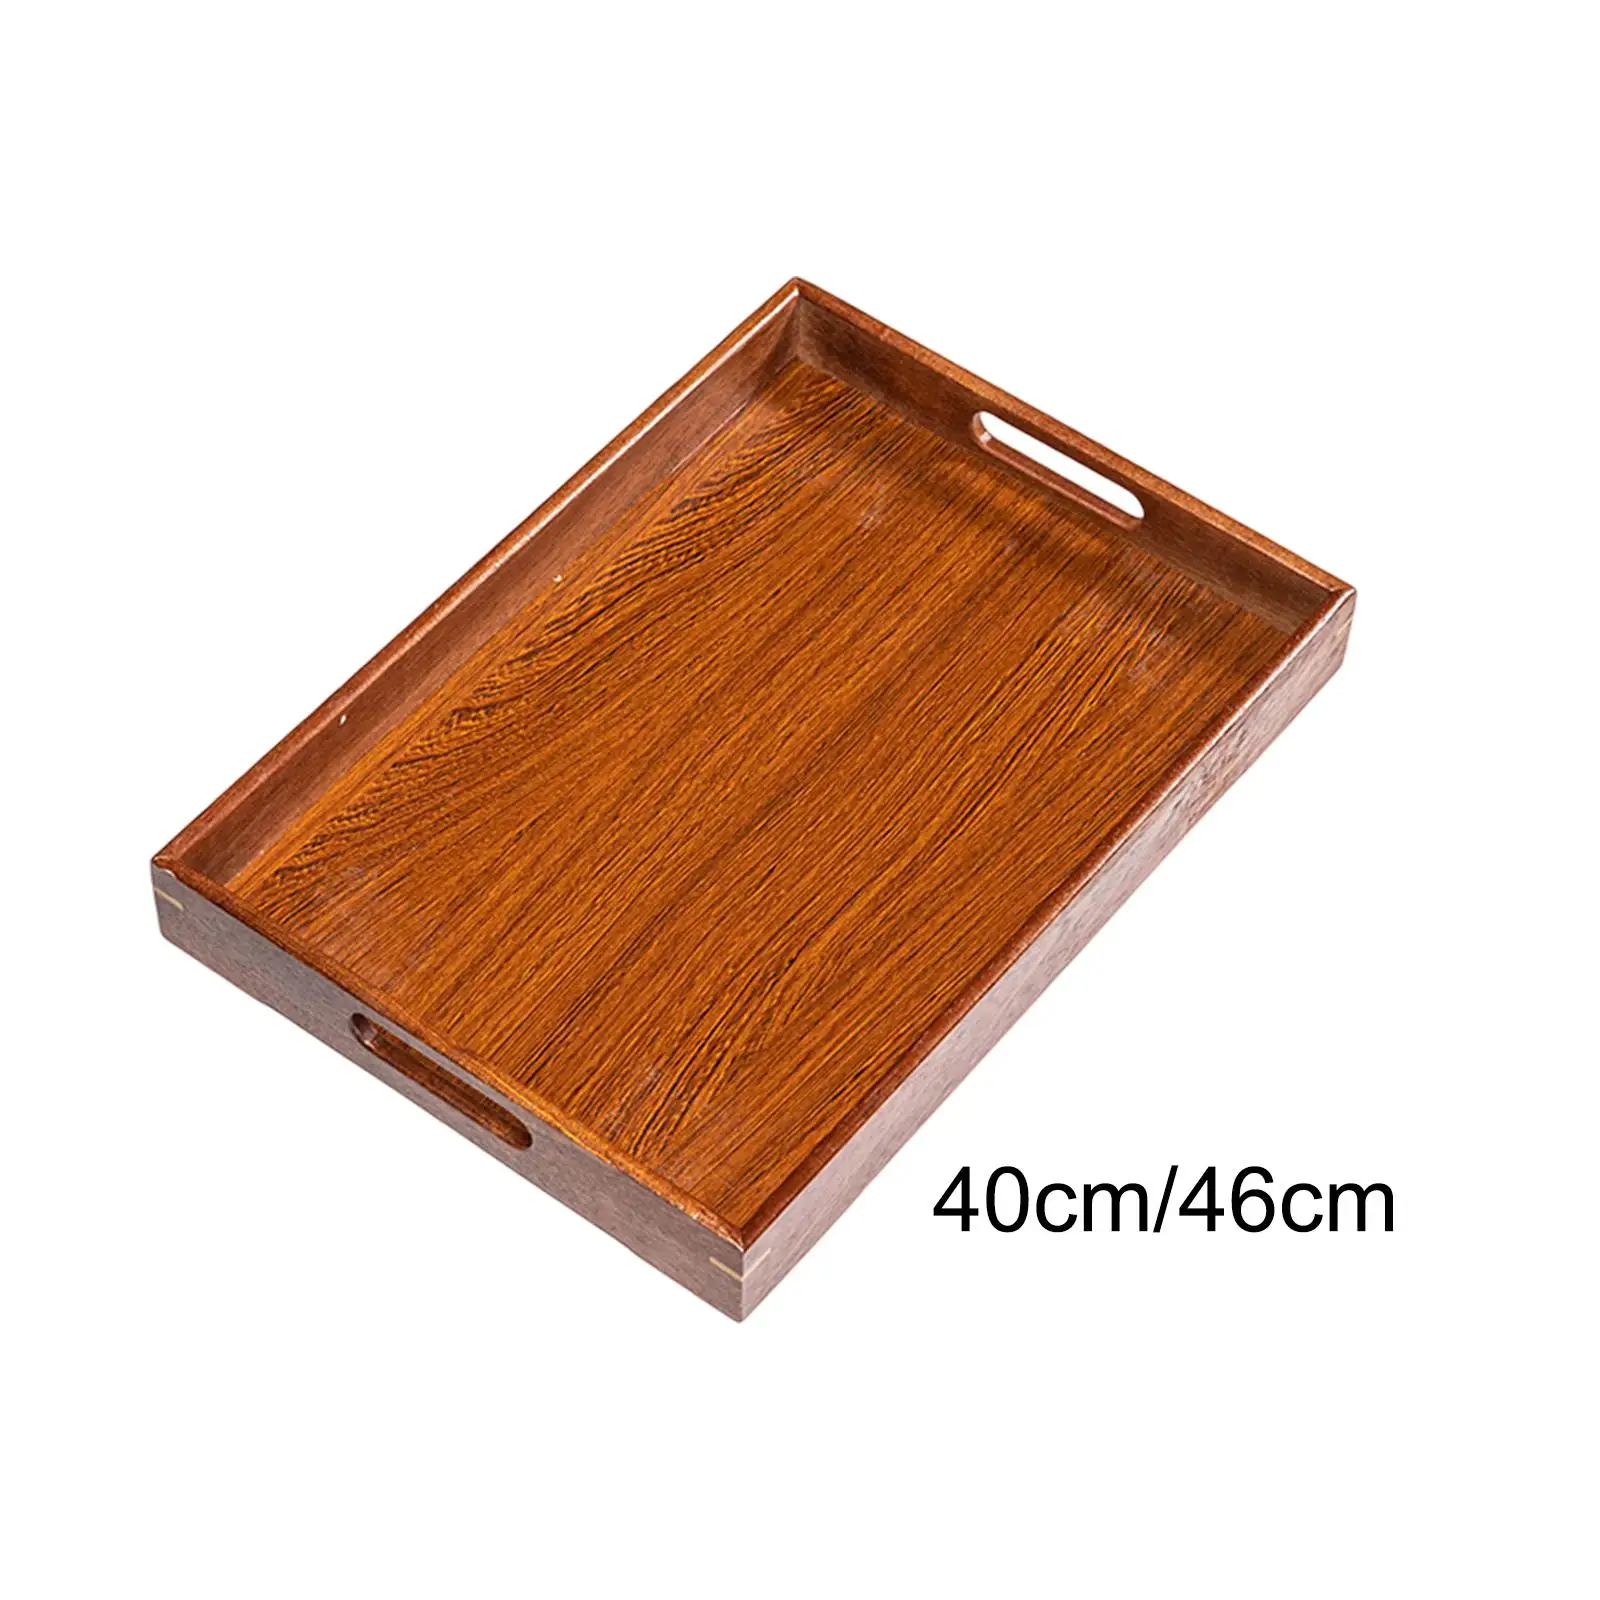 Serving Tray Works for Eating food Tray with Handles Wooden Serving Decorative Tray for Restaurants Living Room tea trays